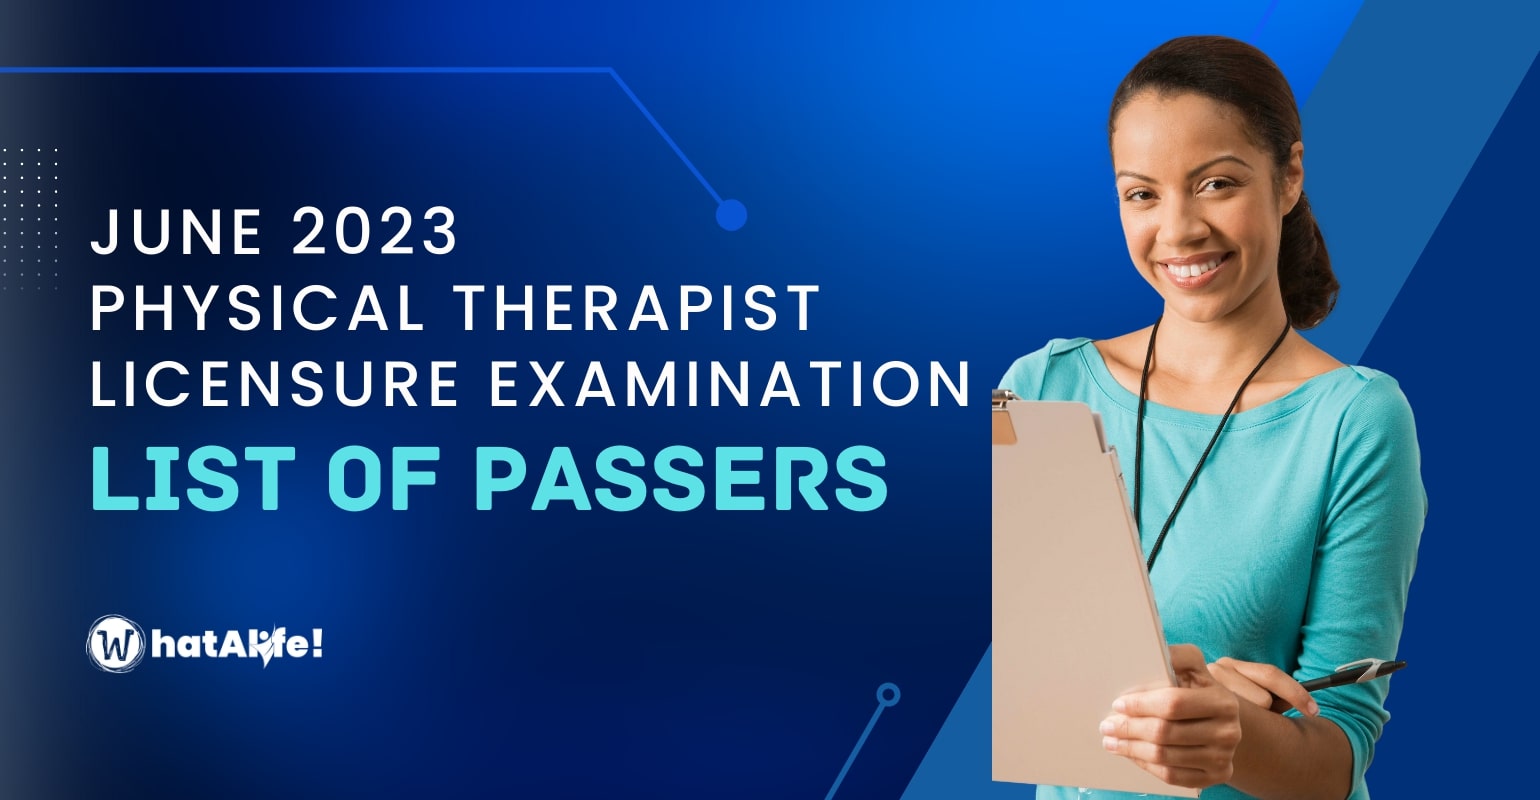 Full List of Passers — June 2023 Physical Therapist Licensure Exam Results